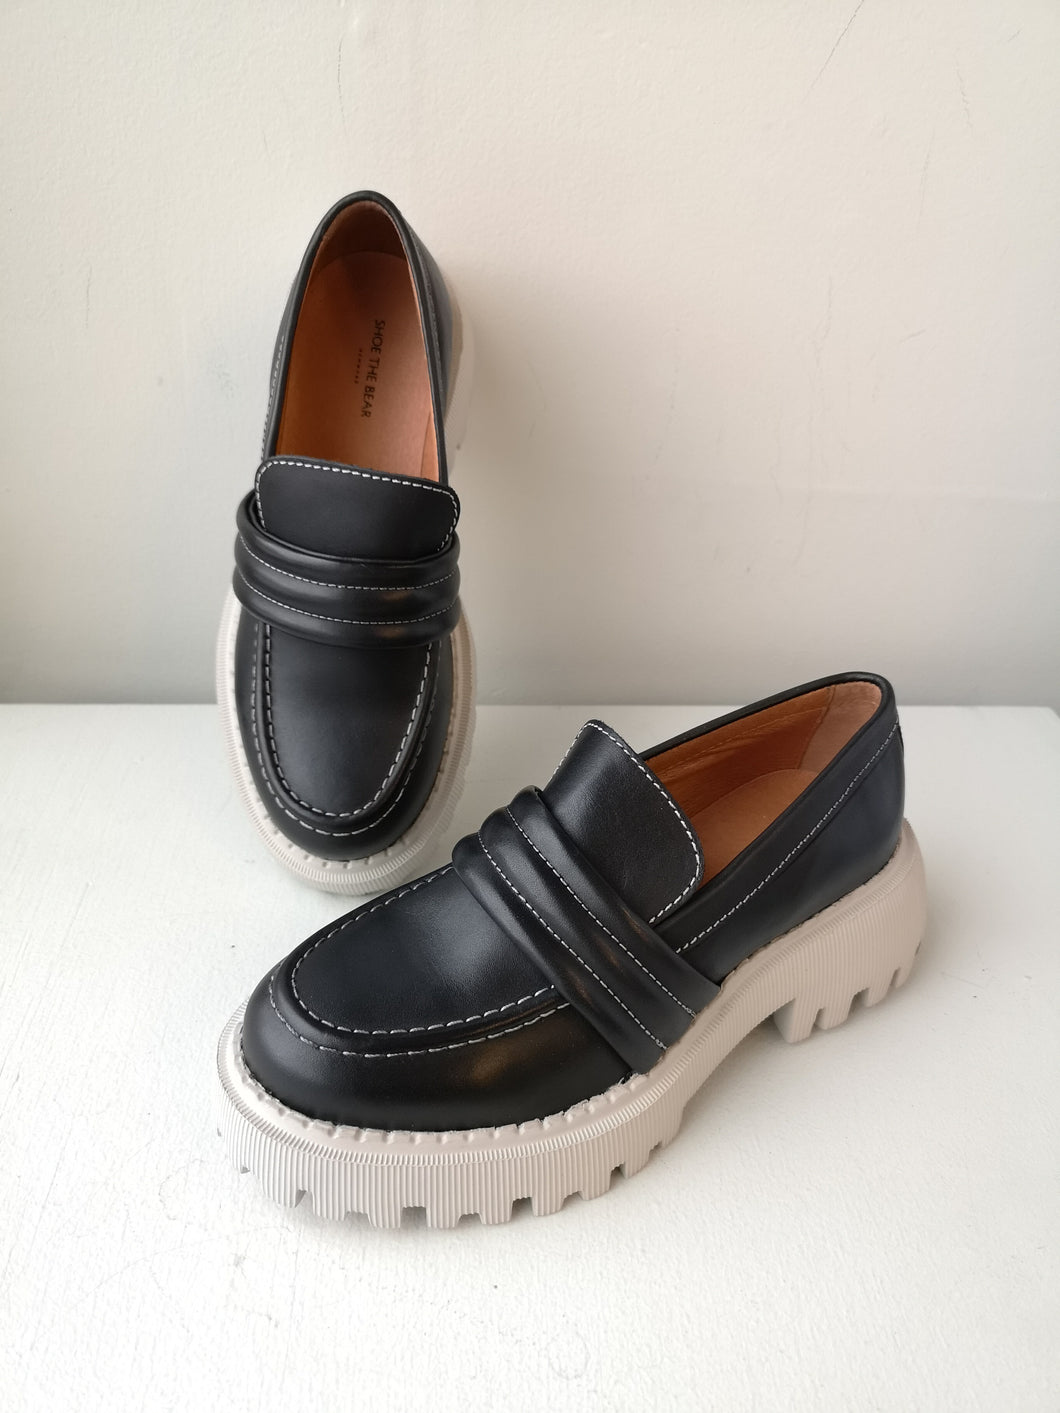 Shoe The Bear Posey Loafer - Black Contrast